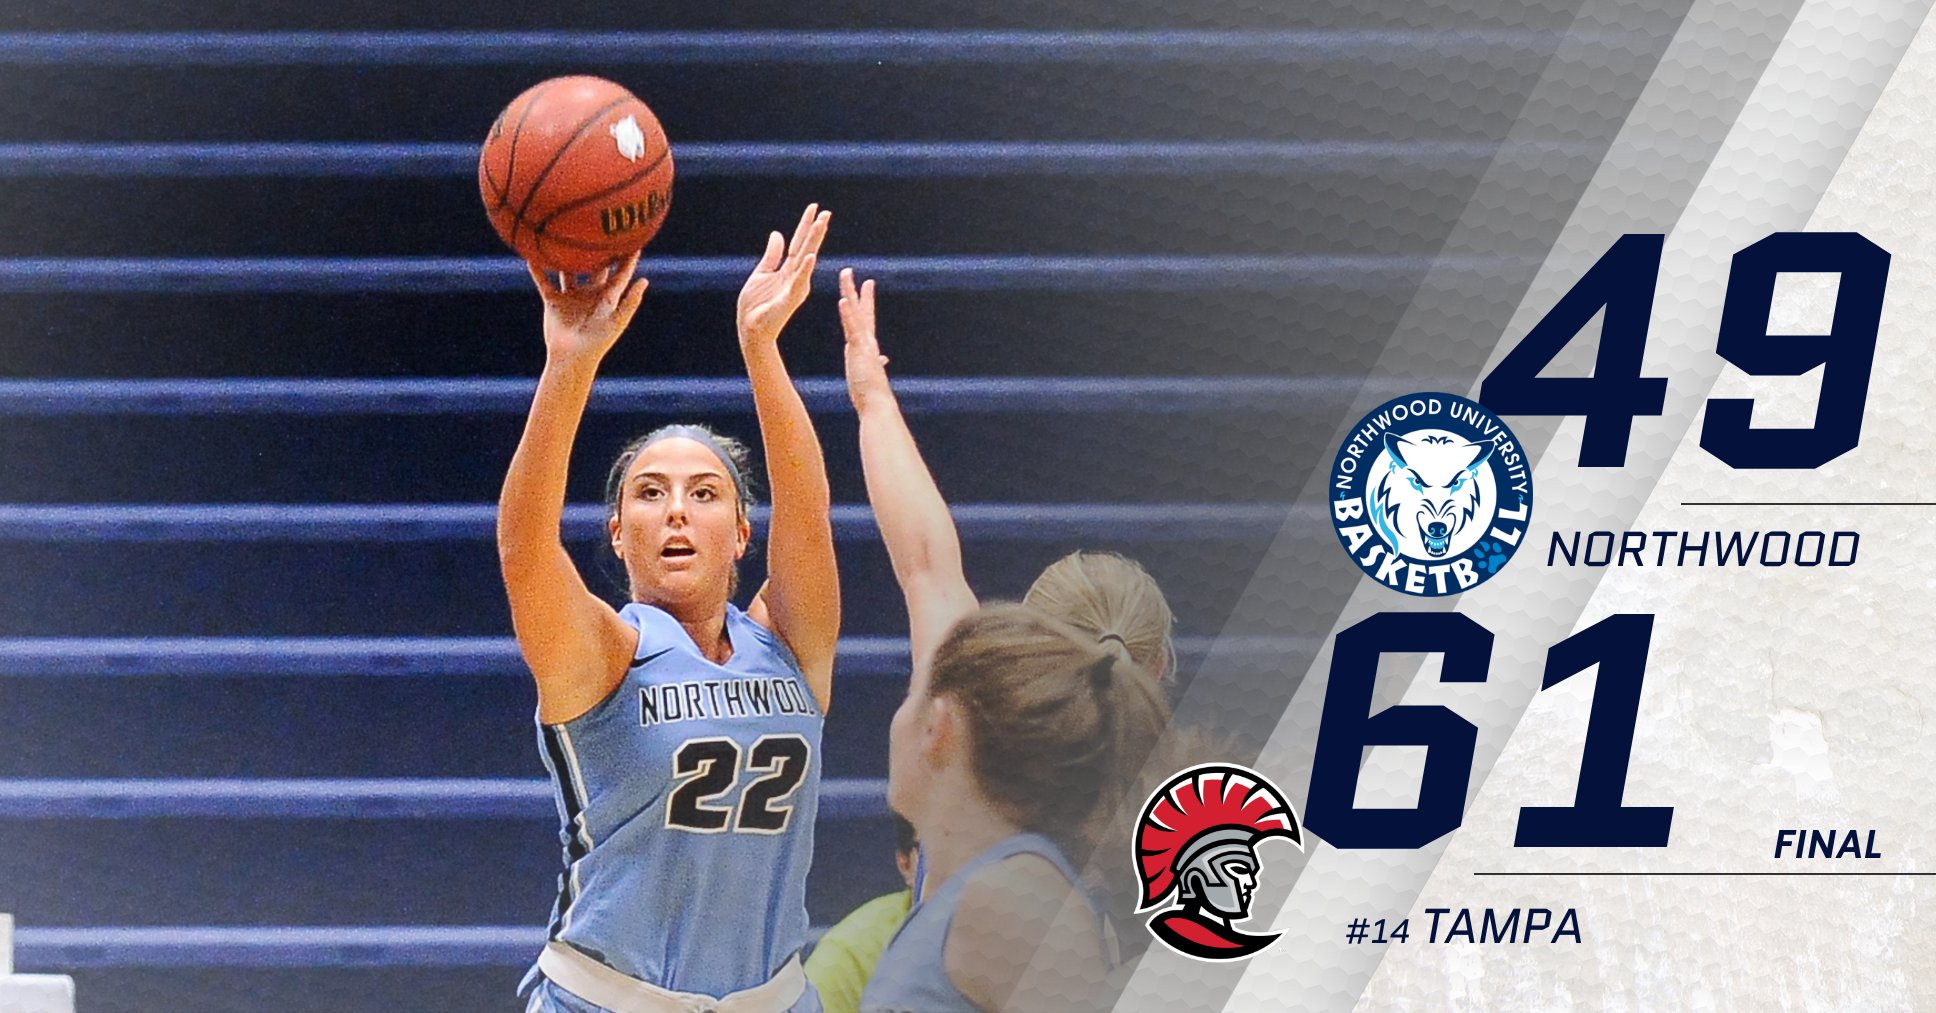 Women's Basketball Drops First Game Of The Season - 61-49 To #14 Tampa